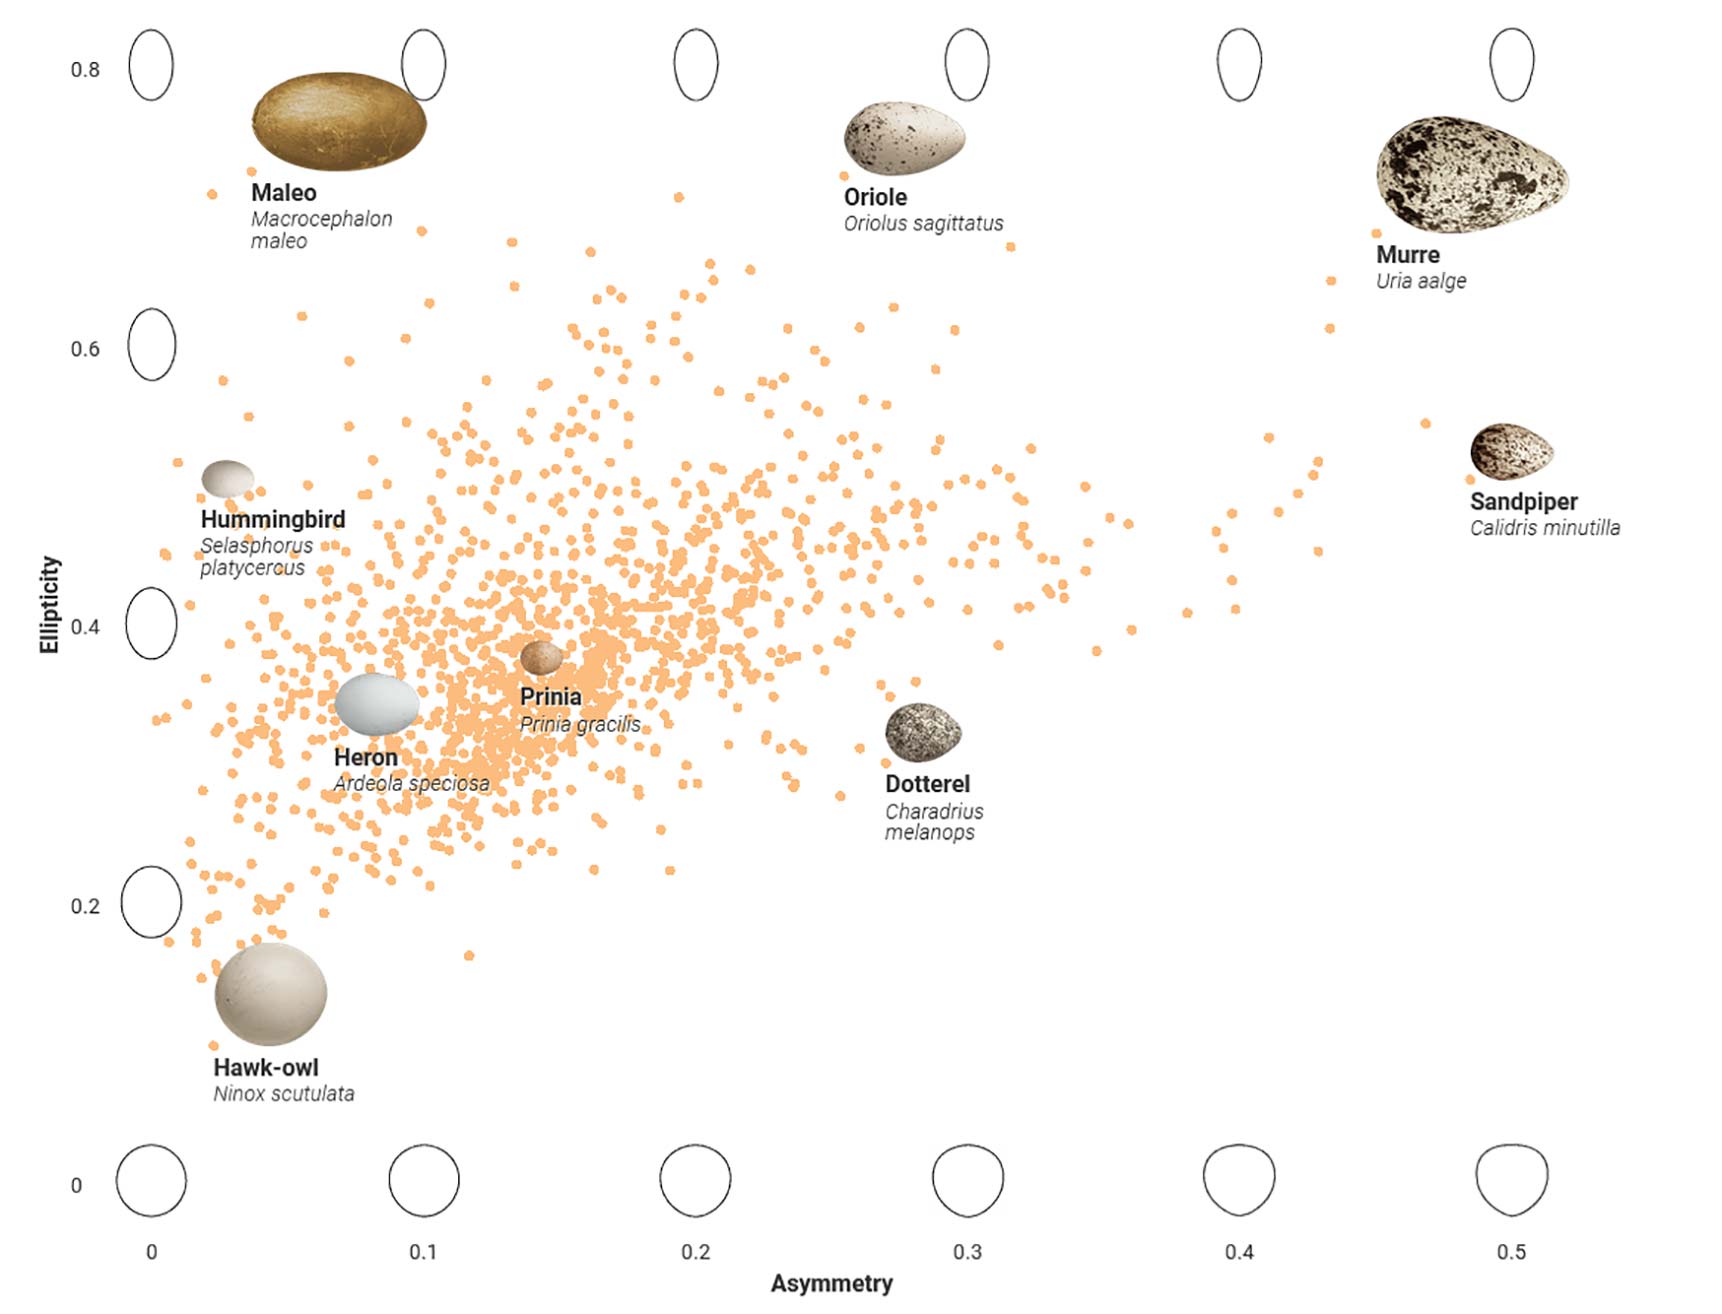 Data visualization showing the relationship between asymmetry and ellipticity in bird eggs